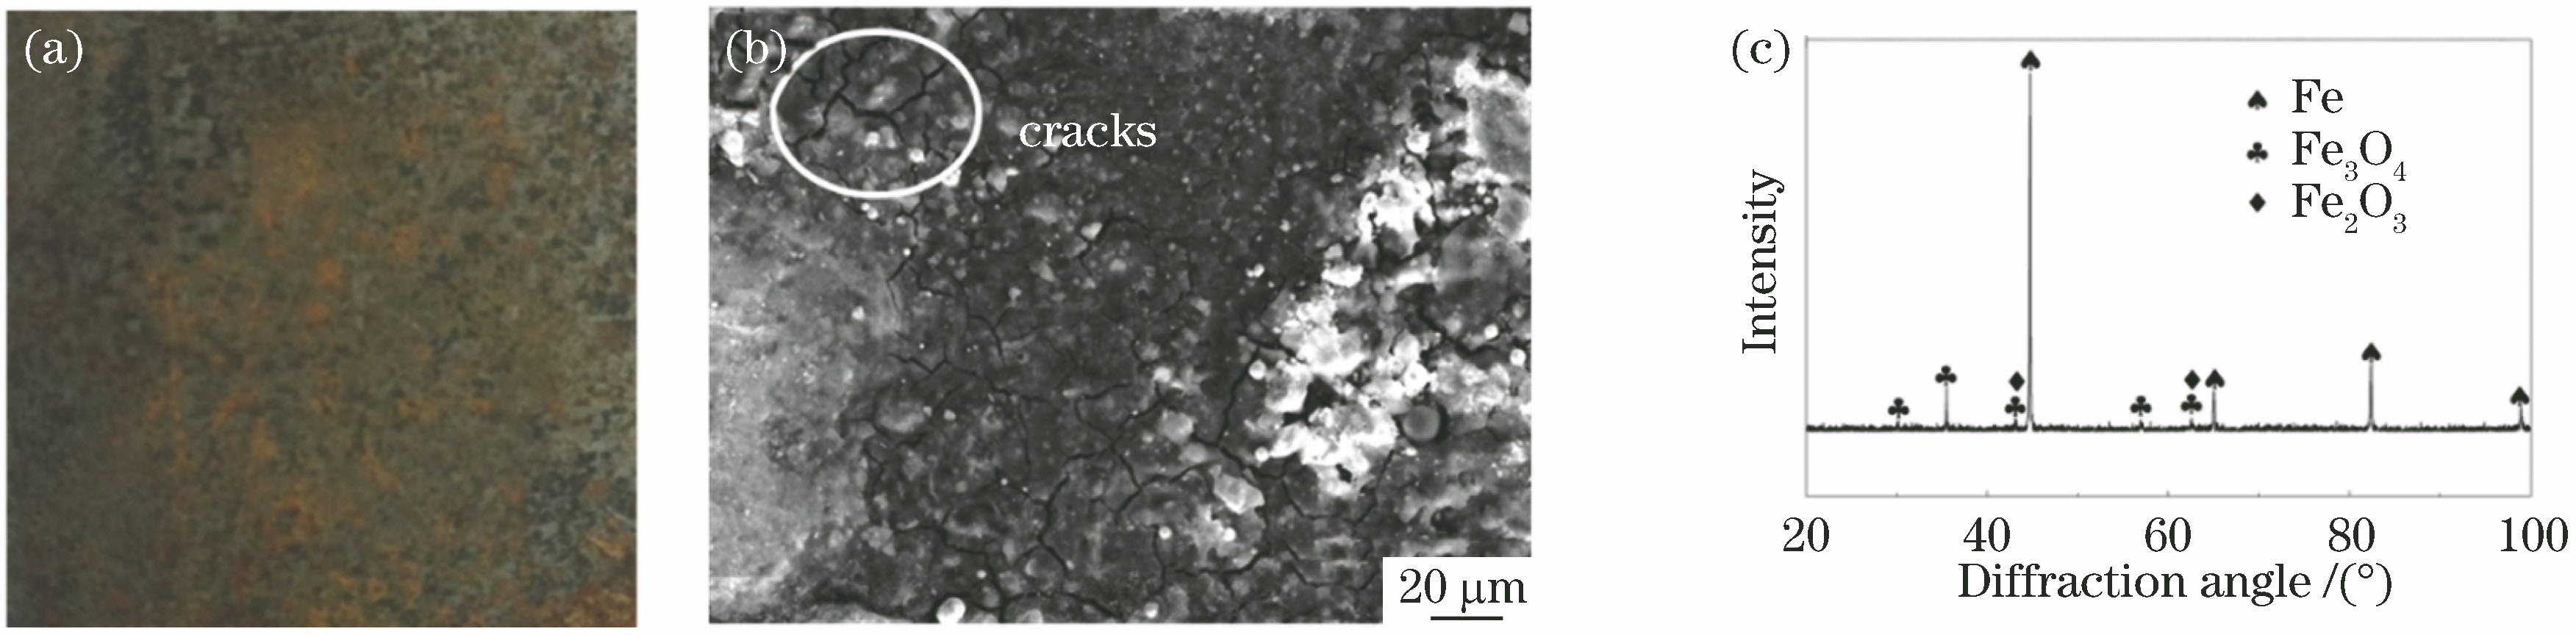 Morphology and composition analysis of rusting layer. (a) Macro morphology; (b) SEM image; (c) X-ray diffraction peak